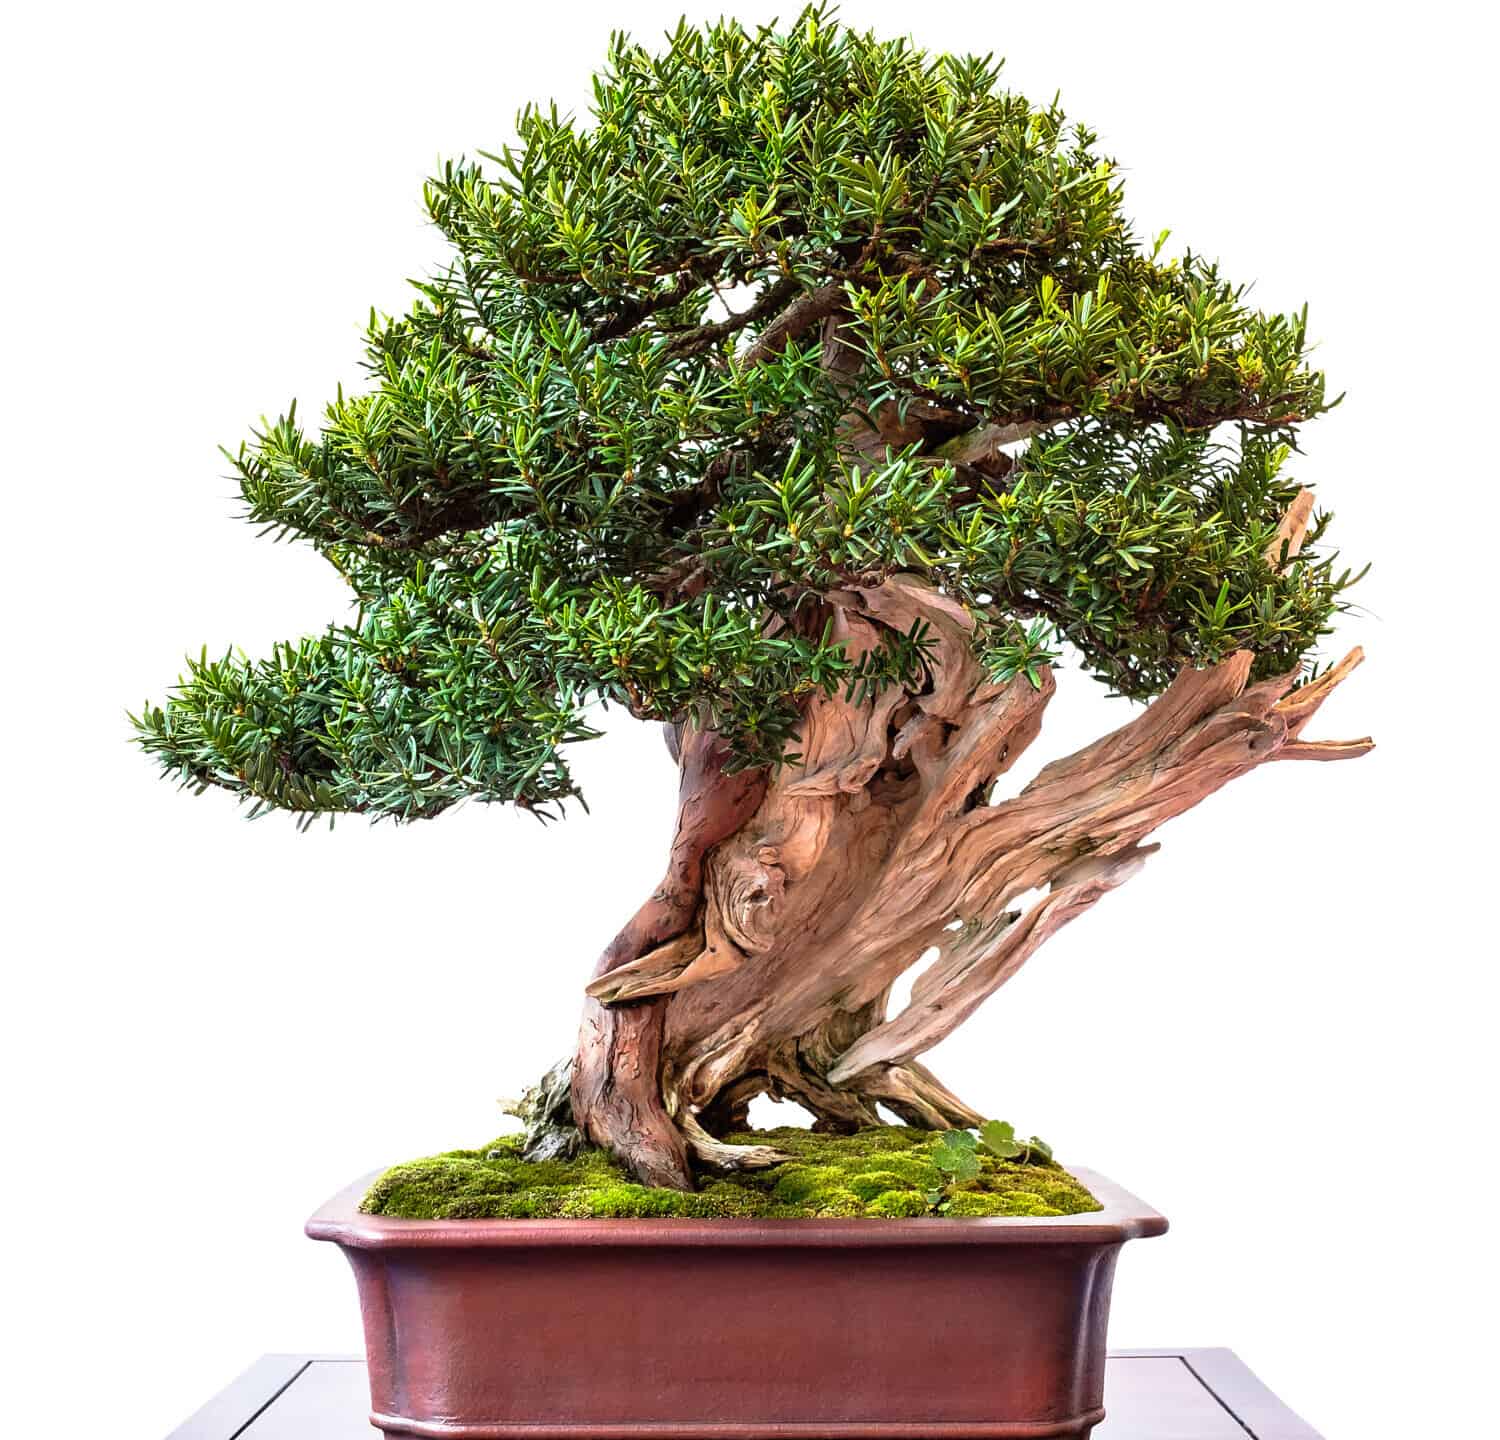 Conifer yew (Taxus cuspidata) as bonsai tree with old deadwood